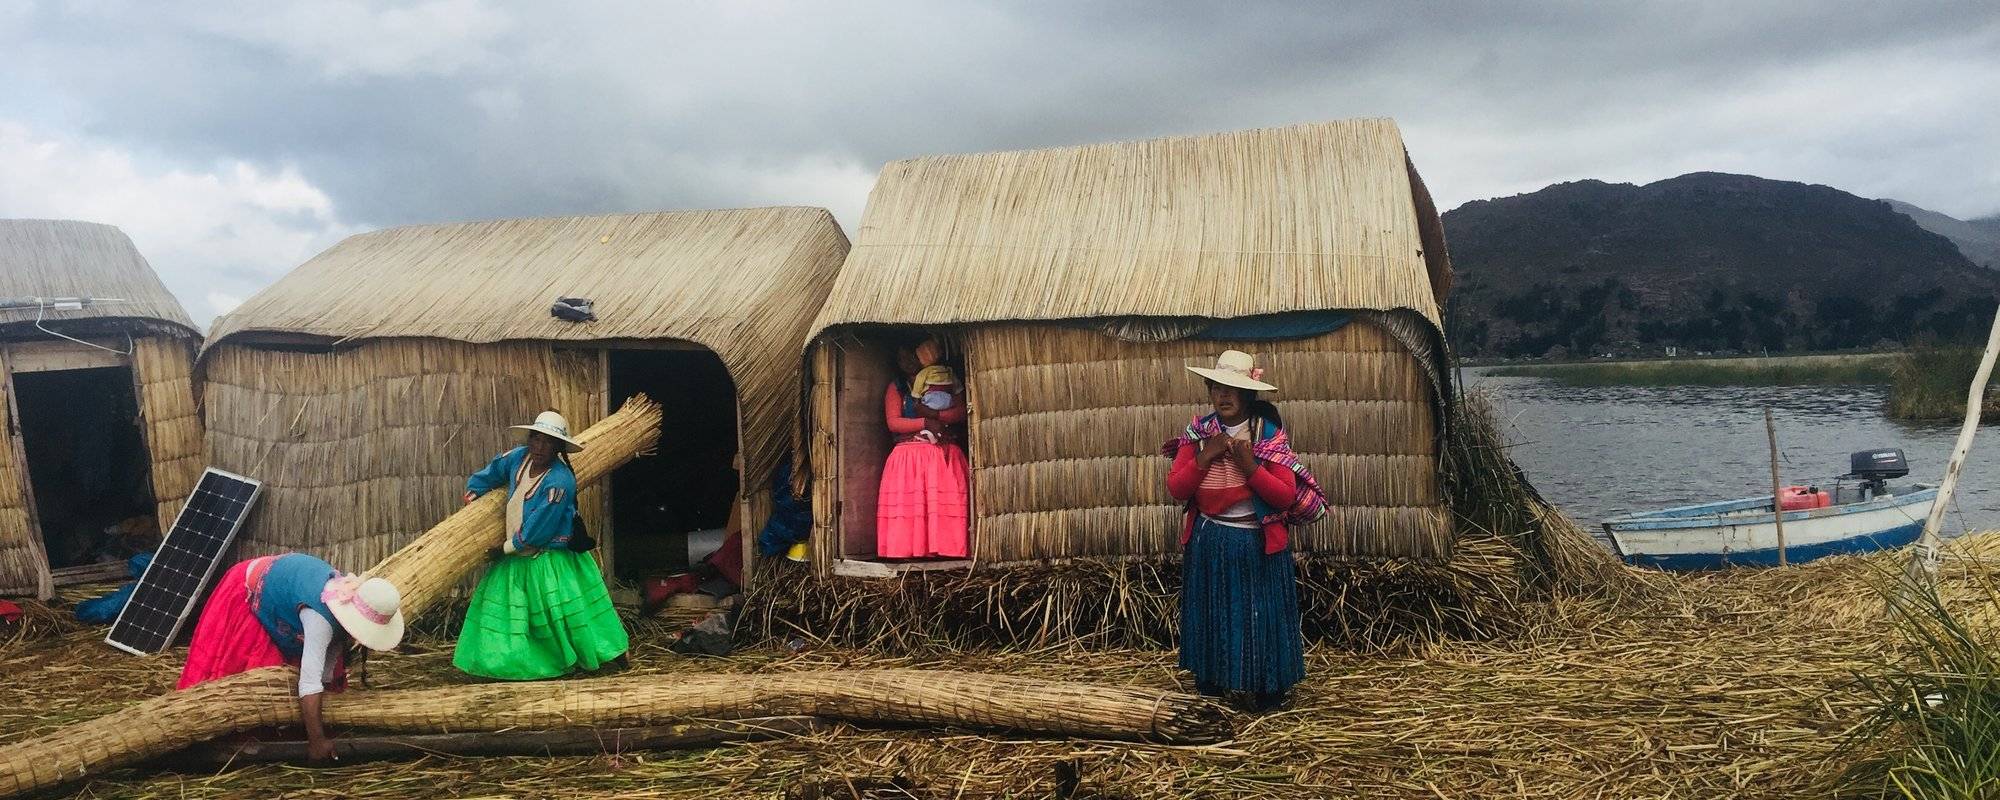 TITICACA LAKE (Part 2) - Uros Floating Islands - The experience of a lifetime